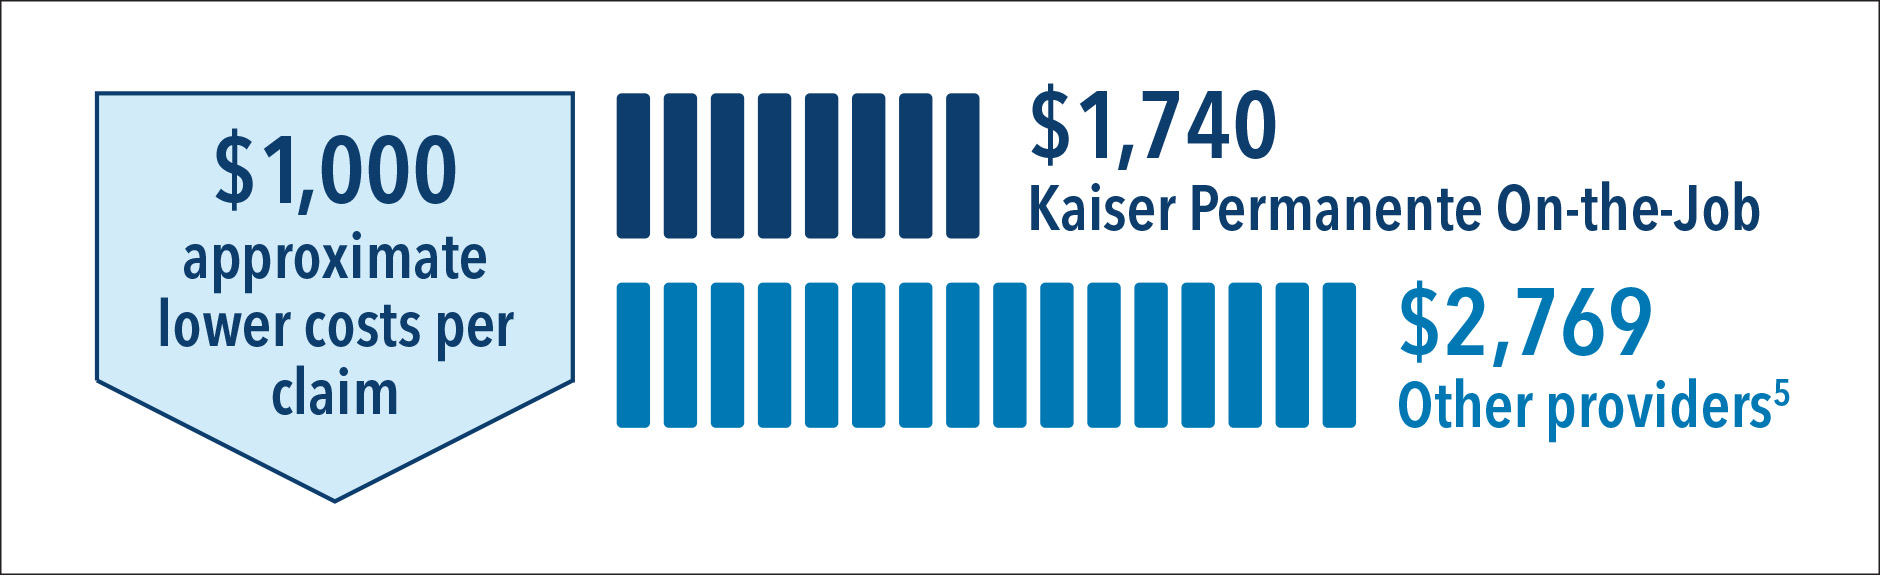 $1,000 approximate lower costs per claim: $1,740 with Kaiser Permanente On-the-Job, vs. $2,796 with other providers